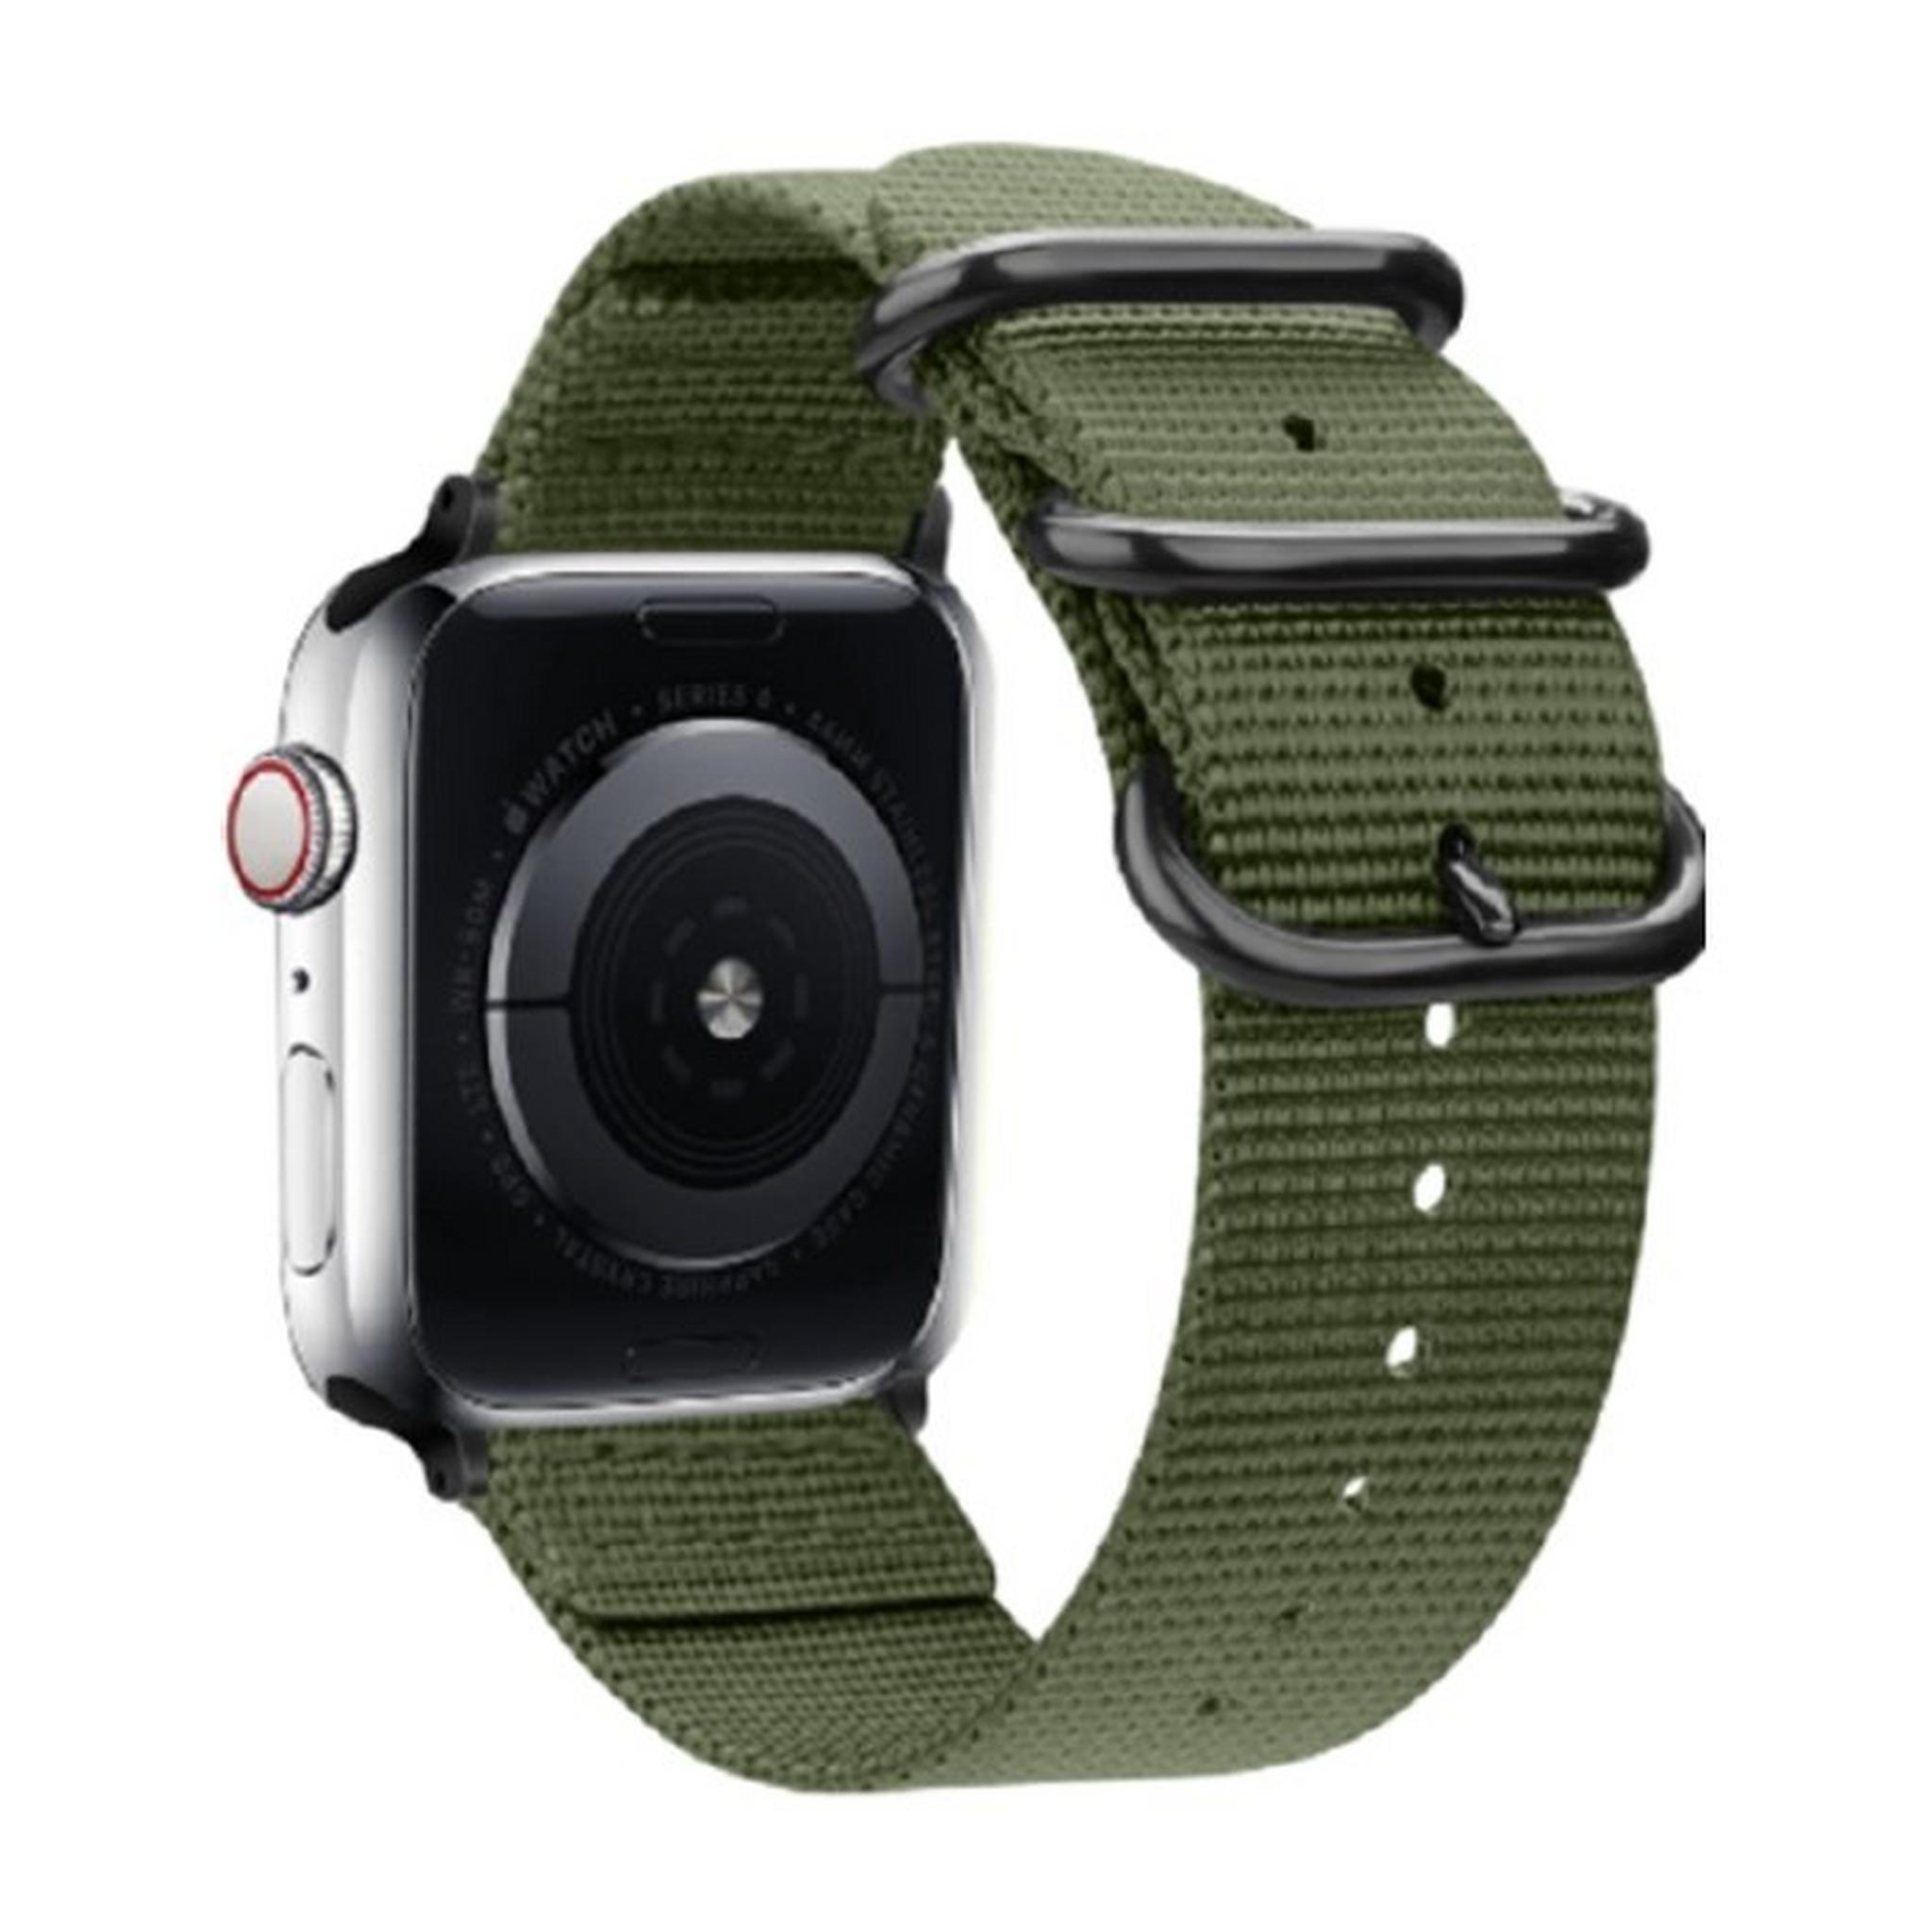 EQ Apple Watch Band Size 38/40MM (OCT 1031) - Army Green